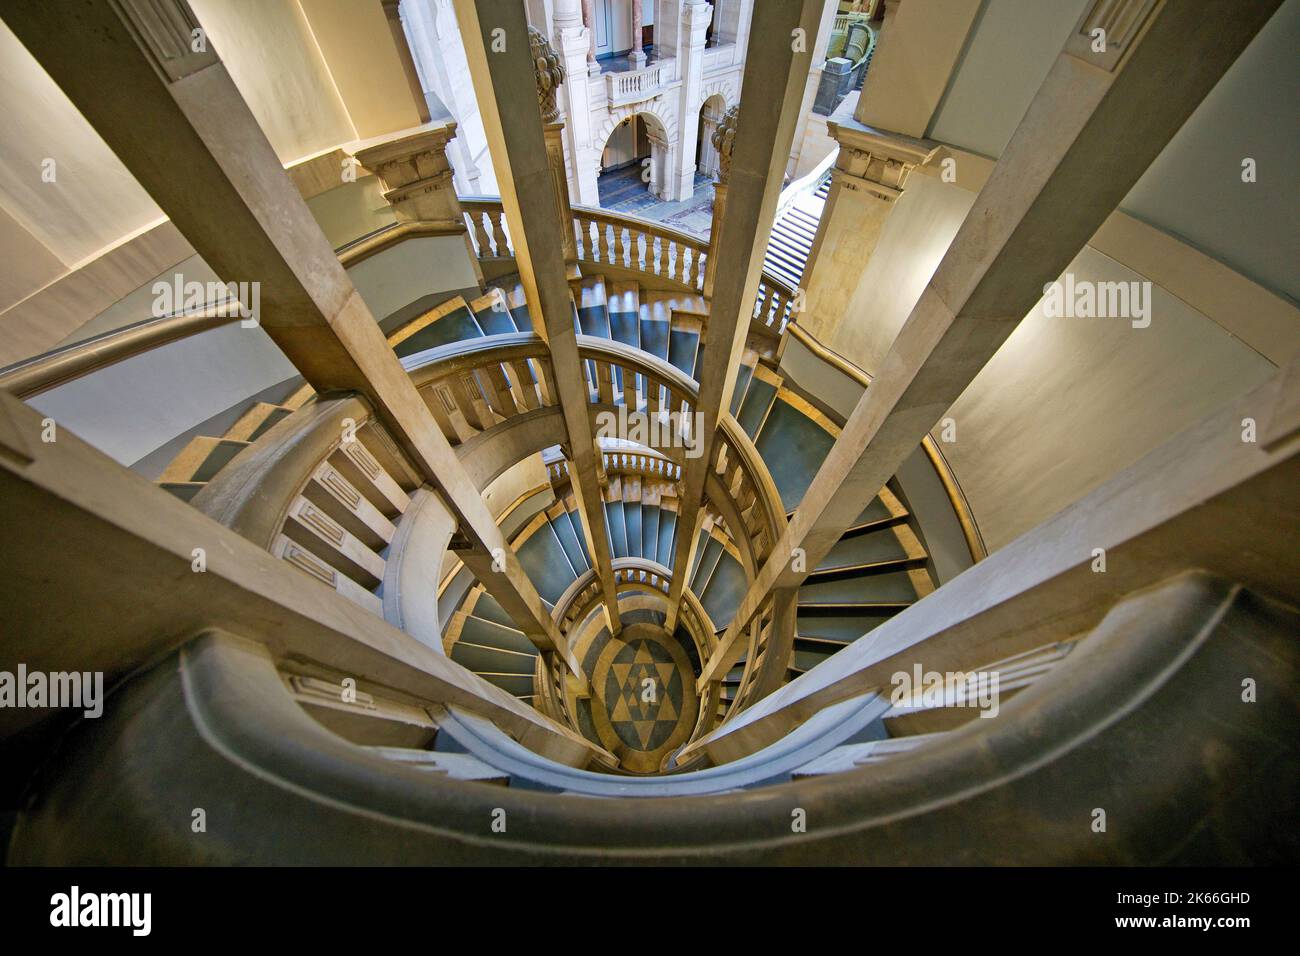 New Town Hall, interior view with spiral staircase, Germany, Lower Saxony, Hanover Stock Photo